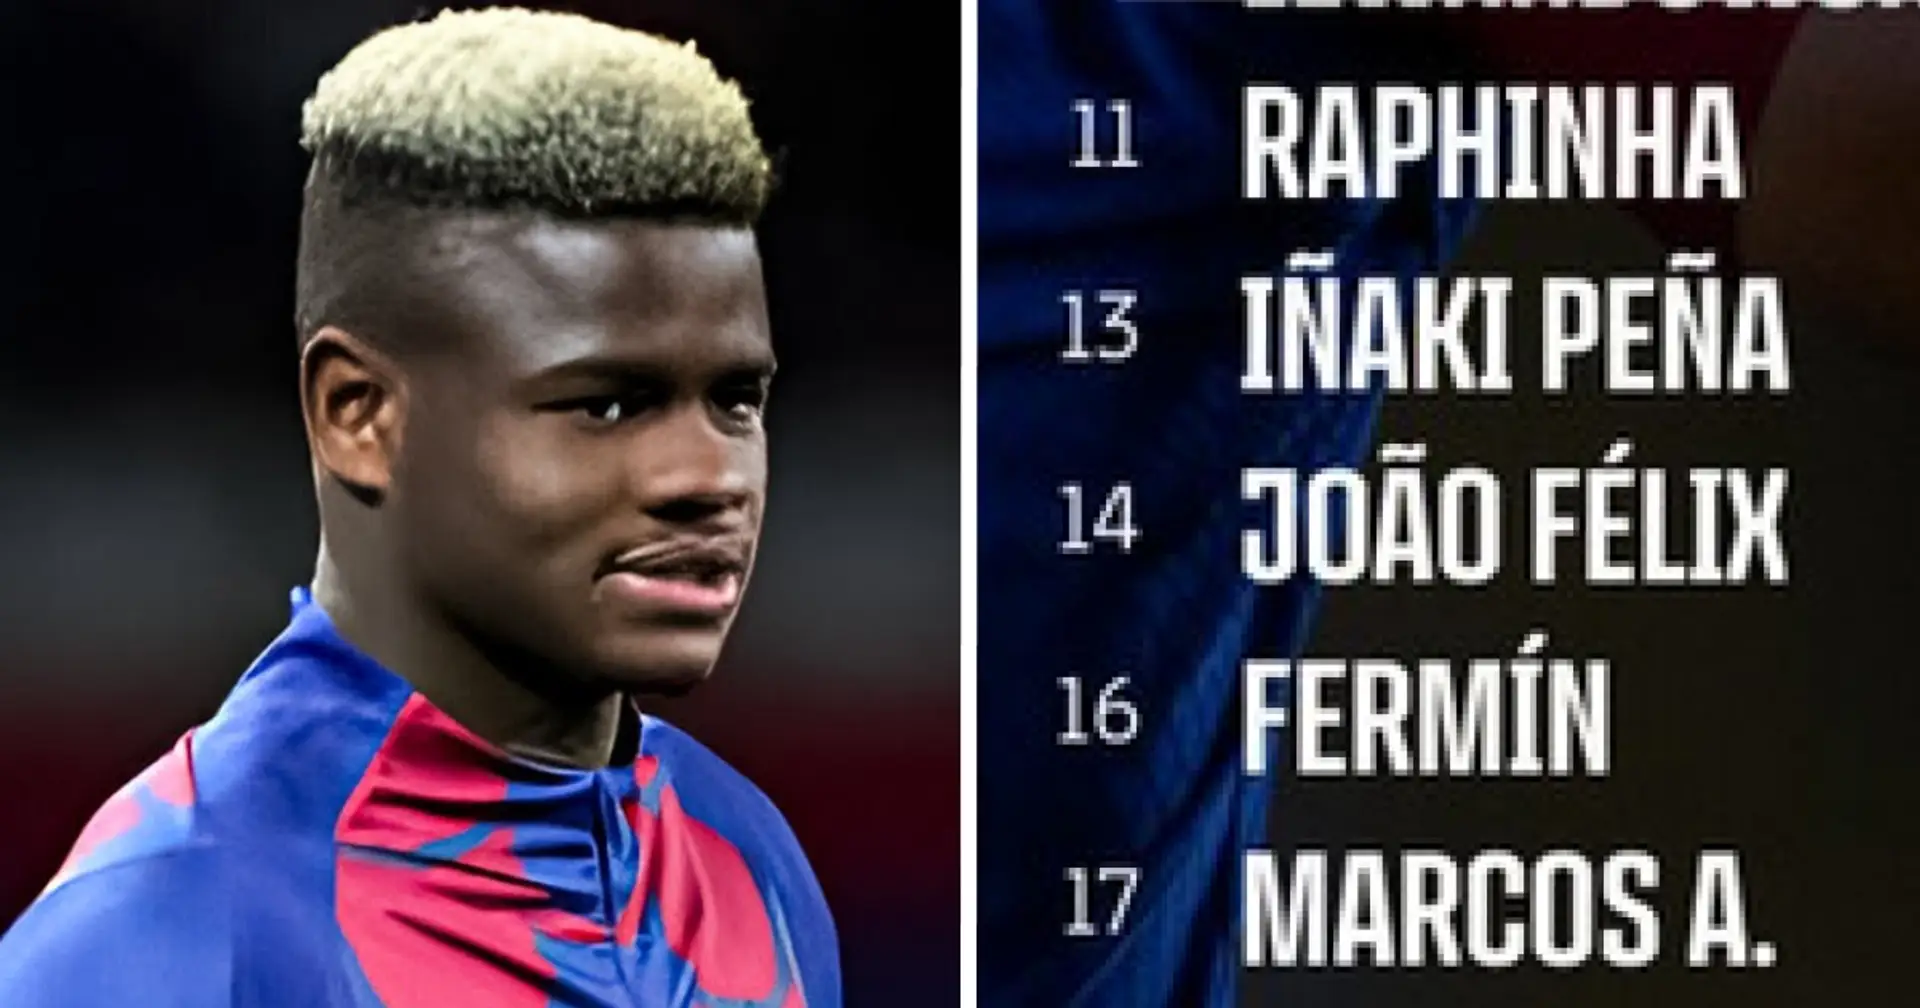 'The Monster' and 'The Shark in': Barca unveil 23-man squad for Las Palmas